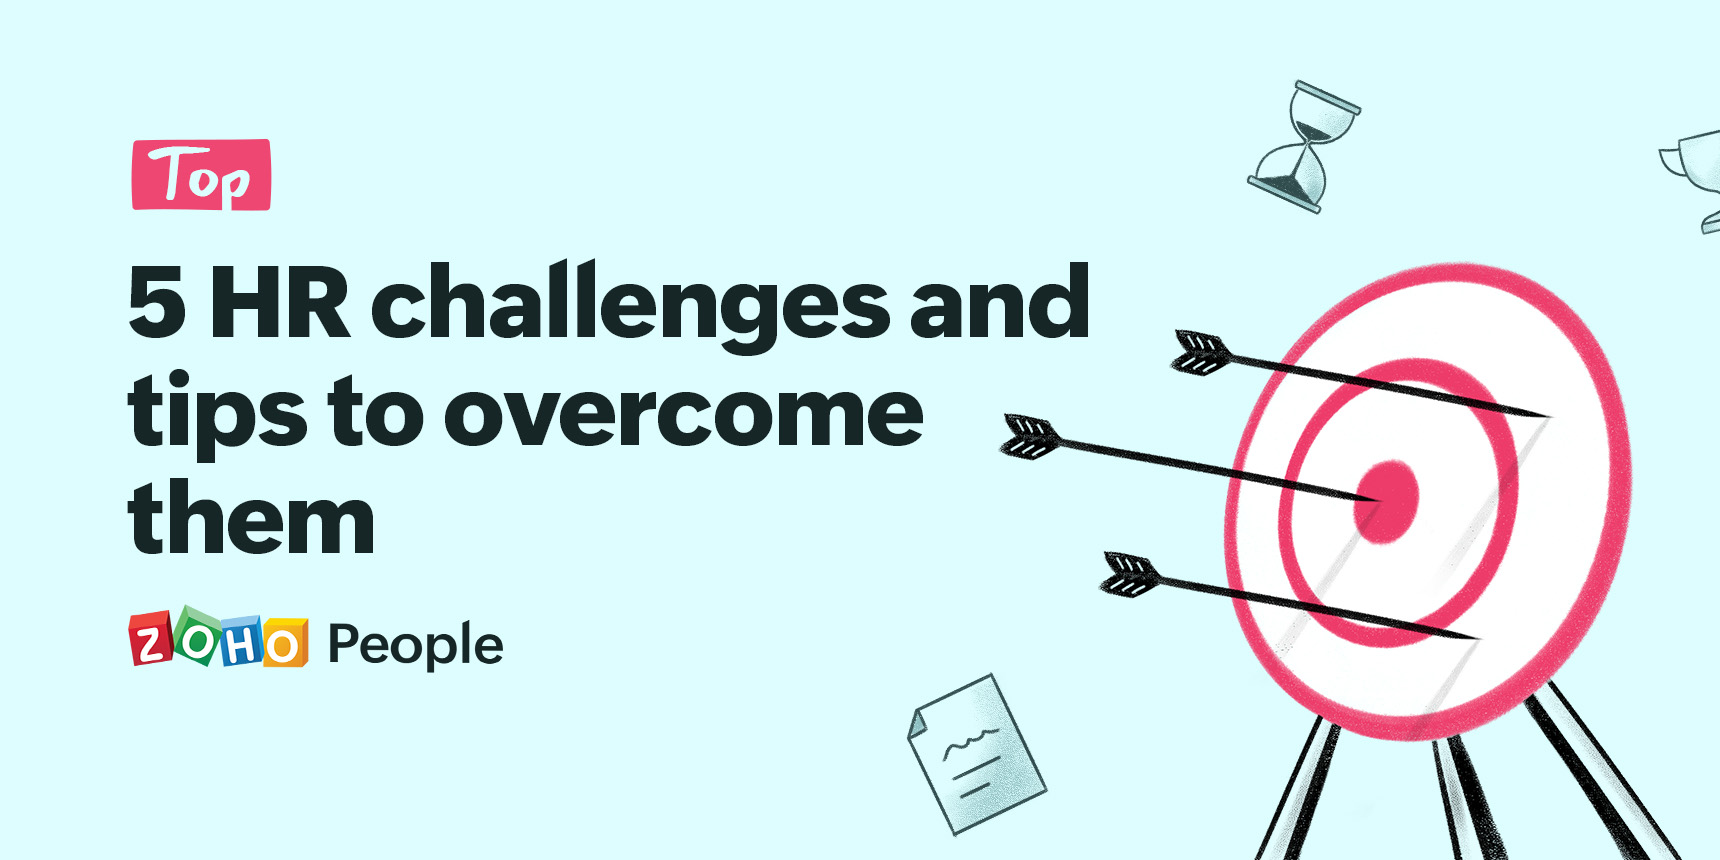 Top 5 HR challenges and tips to overcome them